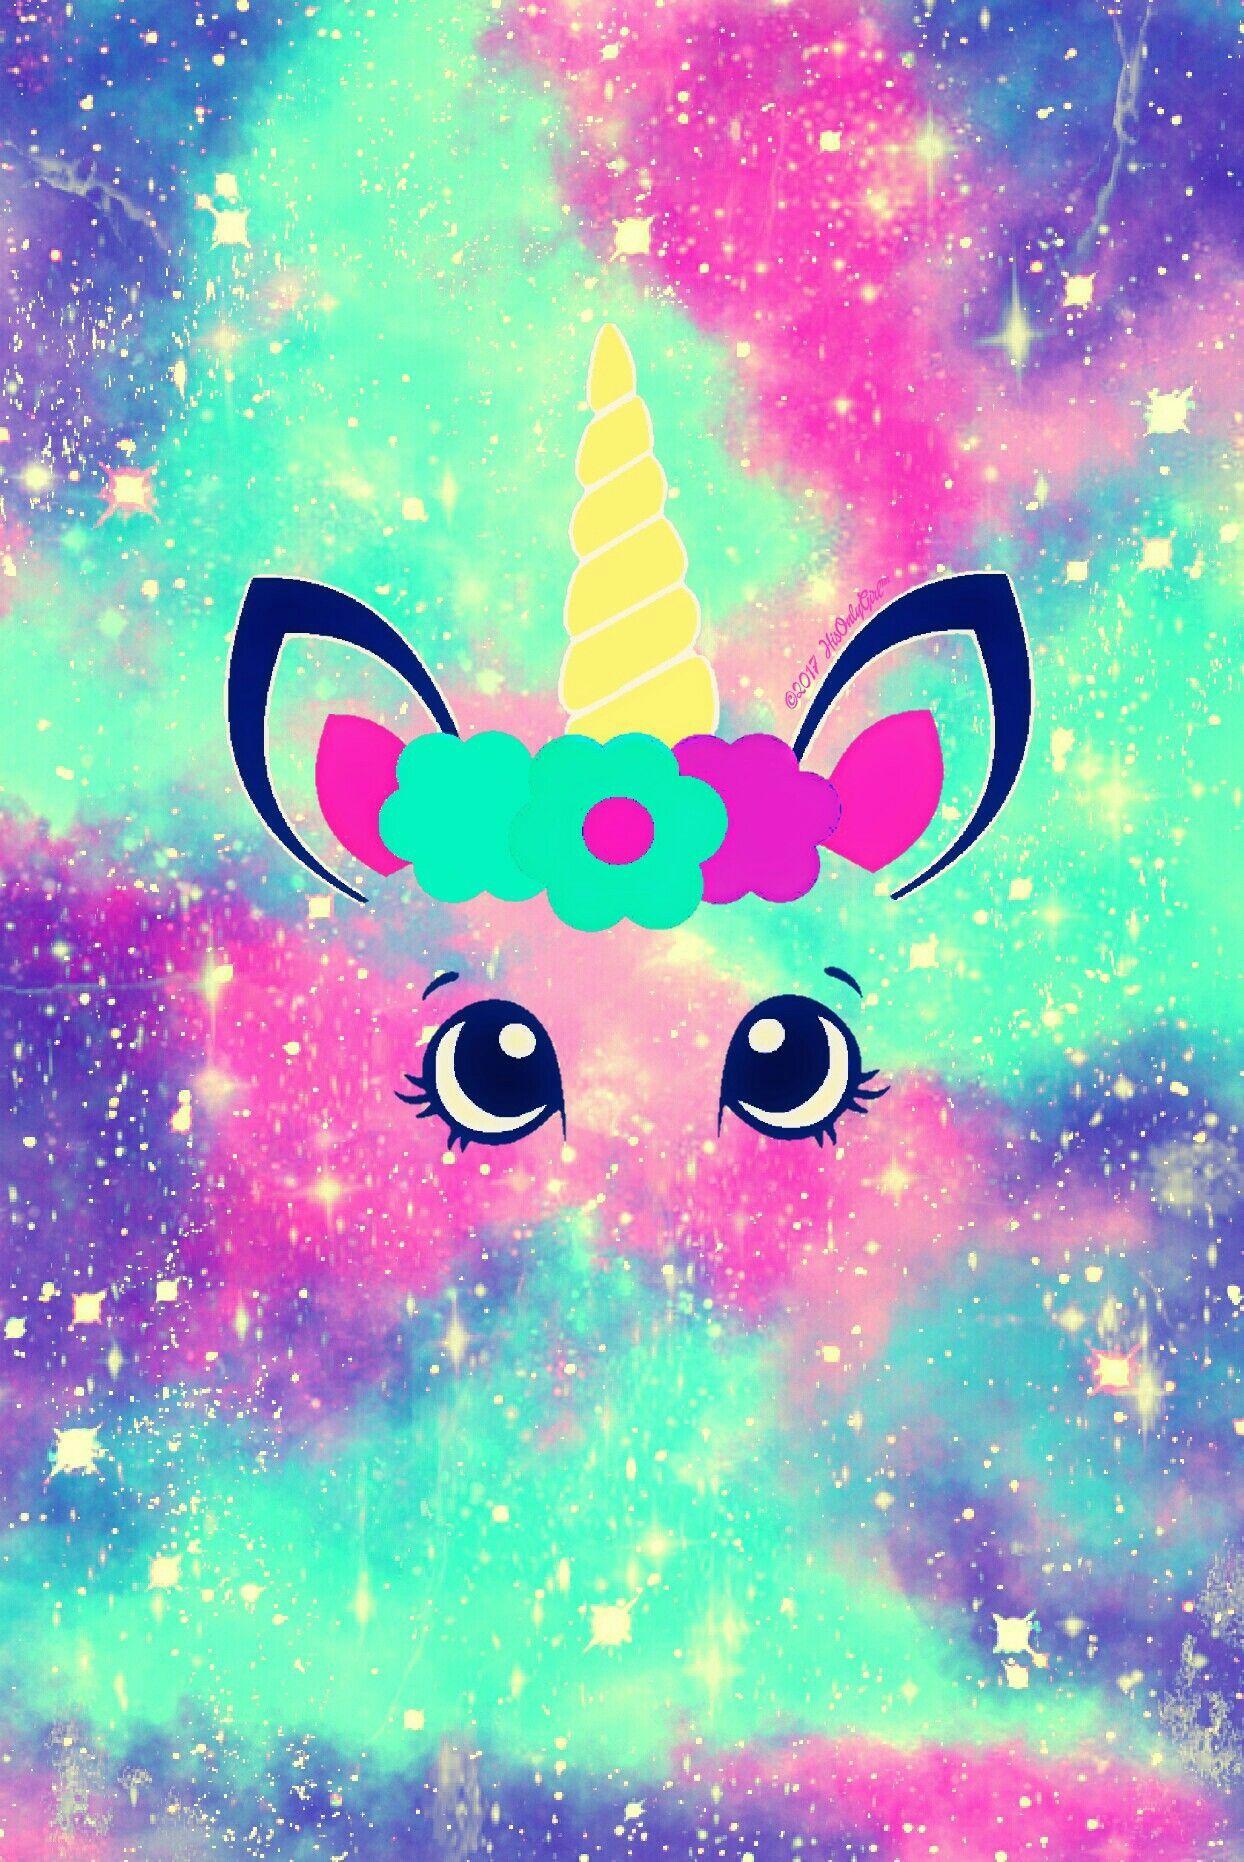 Galaxy Unicorn Wallpapers Top Free Galaxy Unicorn Backgrounds Wallpaperaccess You can also upload and share your favorite galaxy unicorn wallpapers. galaxy unicorn wallpapers top free